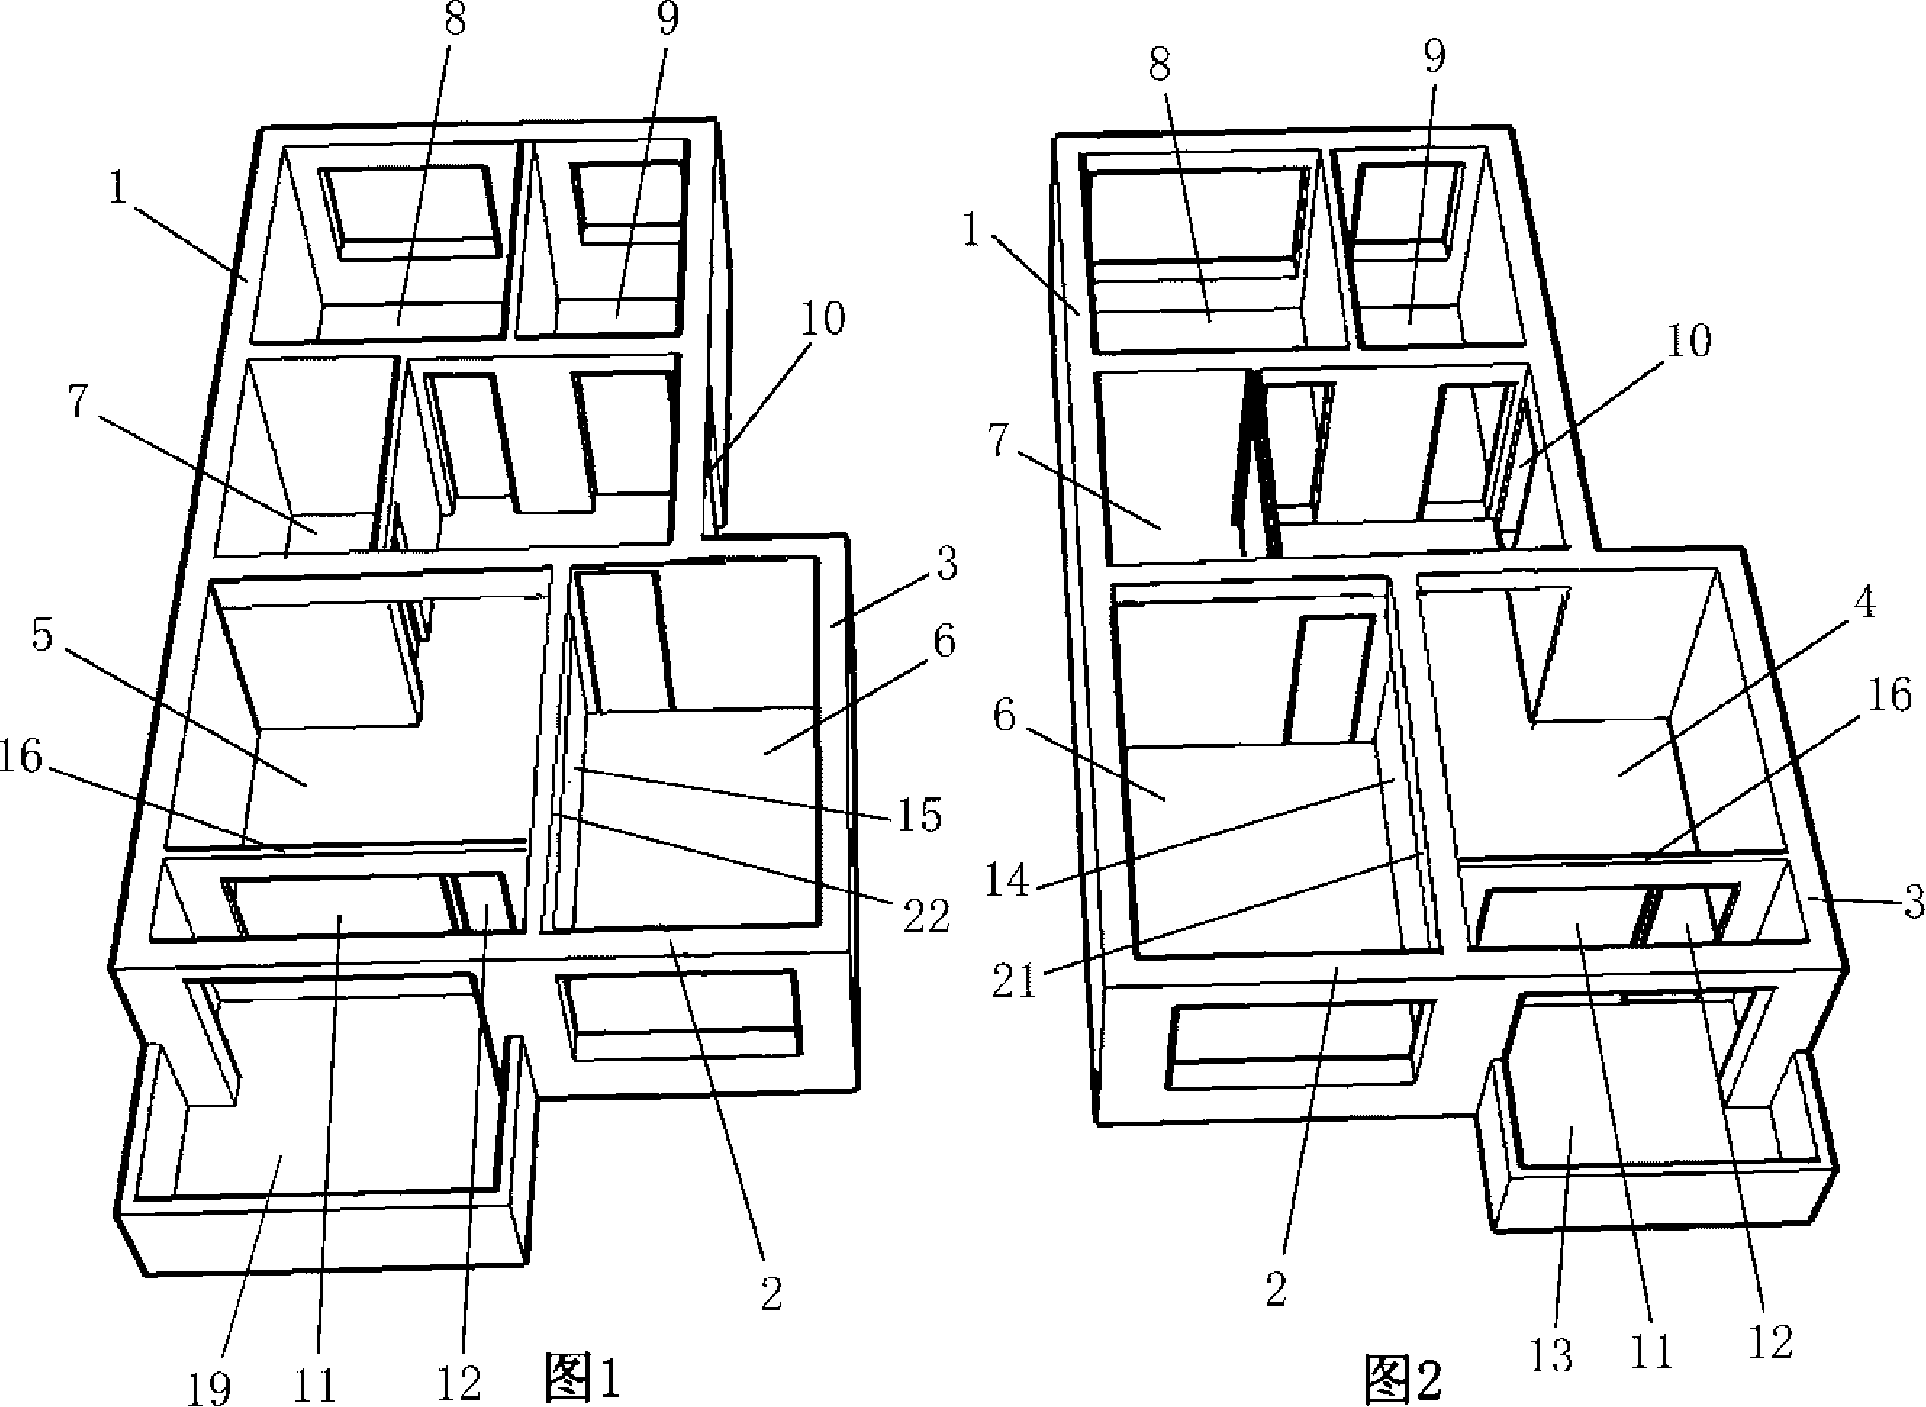 Multilayer and high-rise residential building of odd and even layer asymmetric matrix